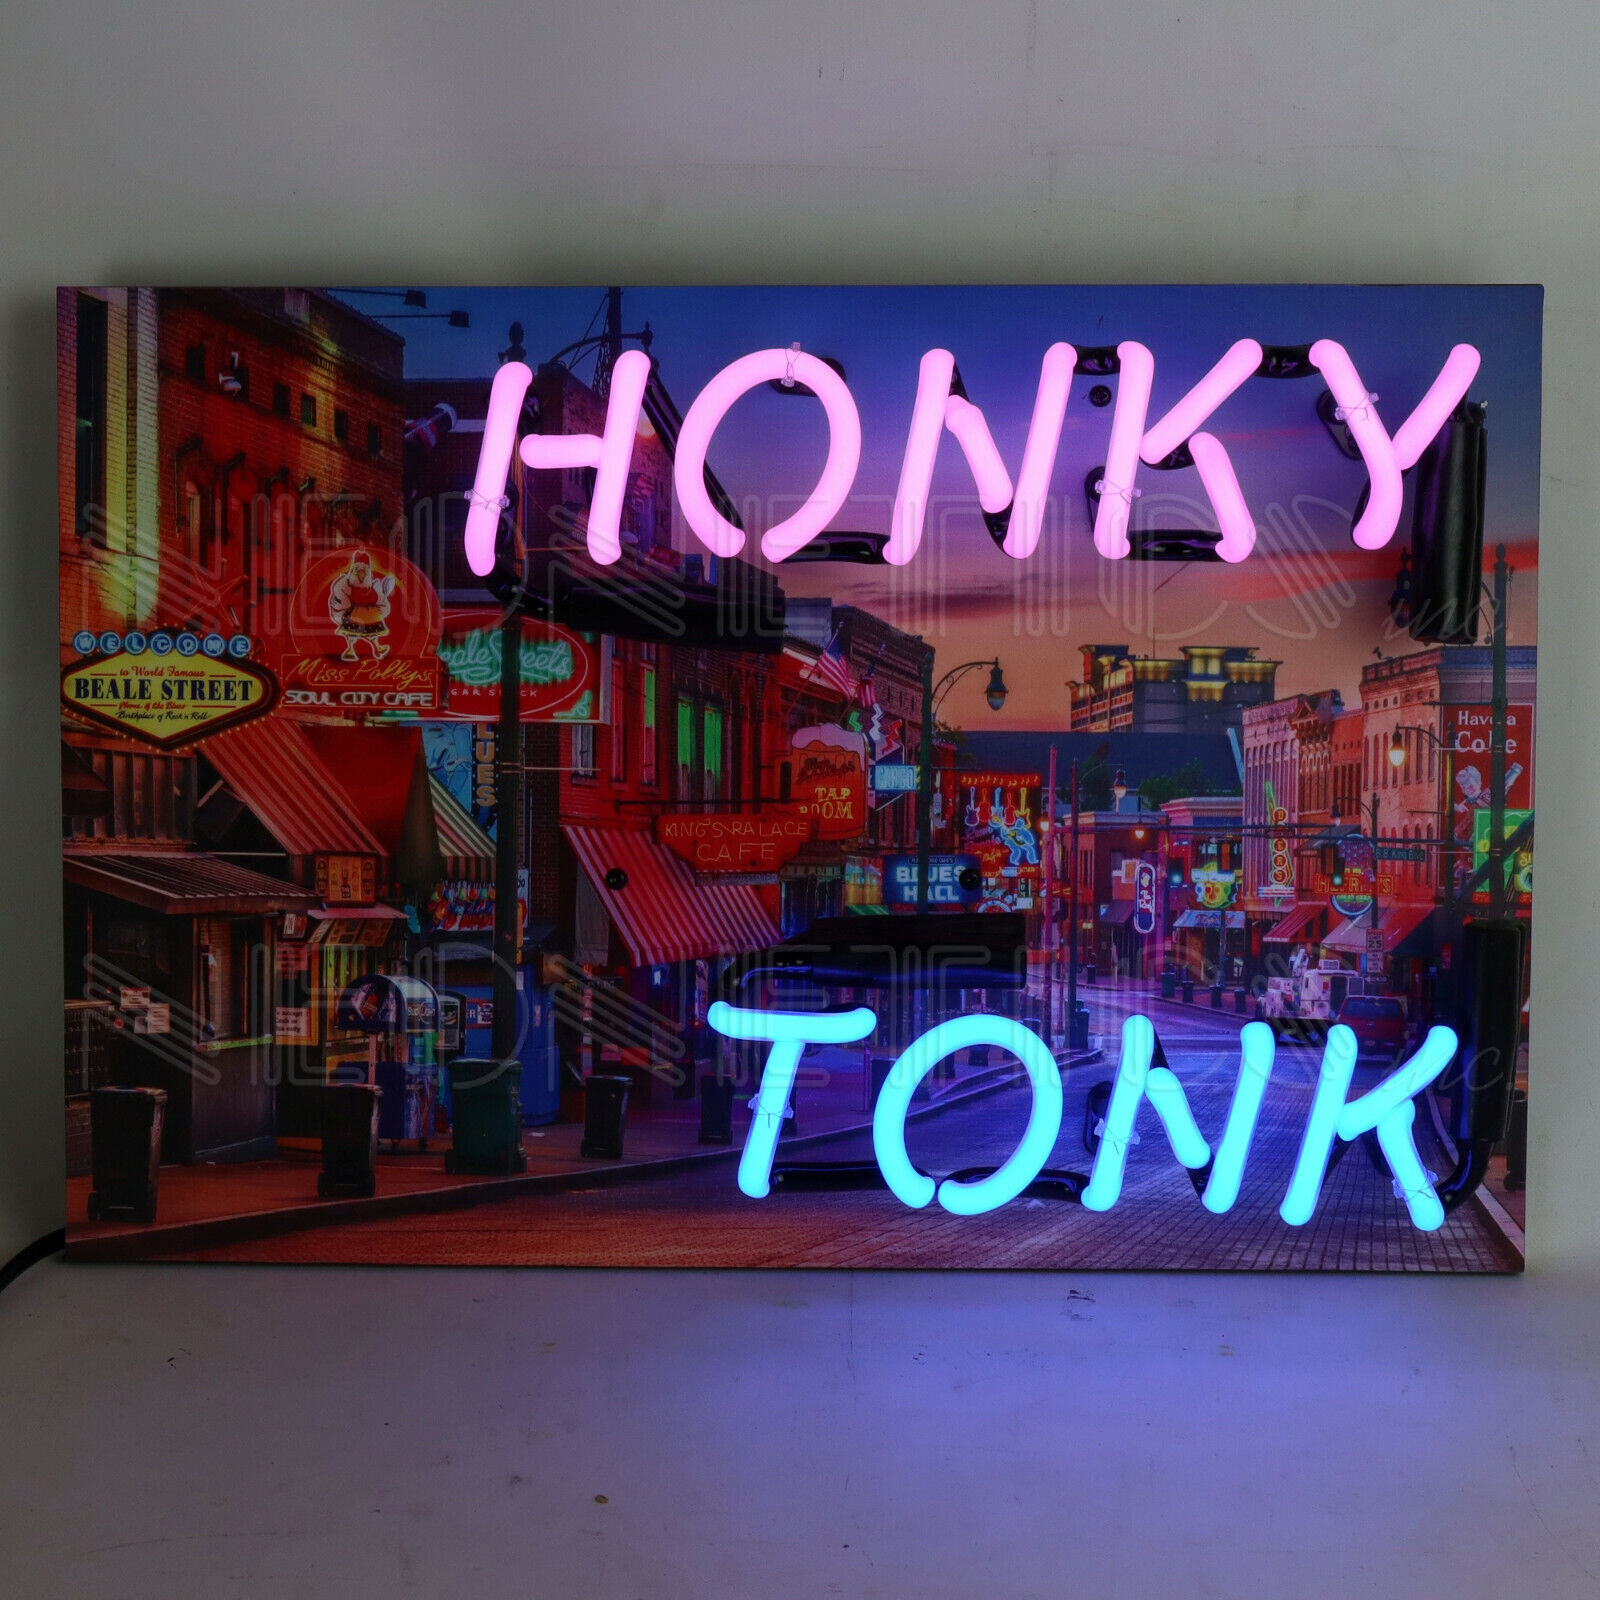 Honky Tonk Neon sign Beale St. Memphis TN Country Music Bar sign Lamp light